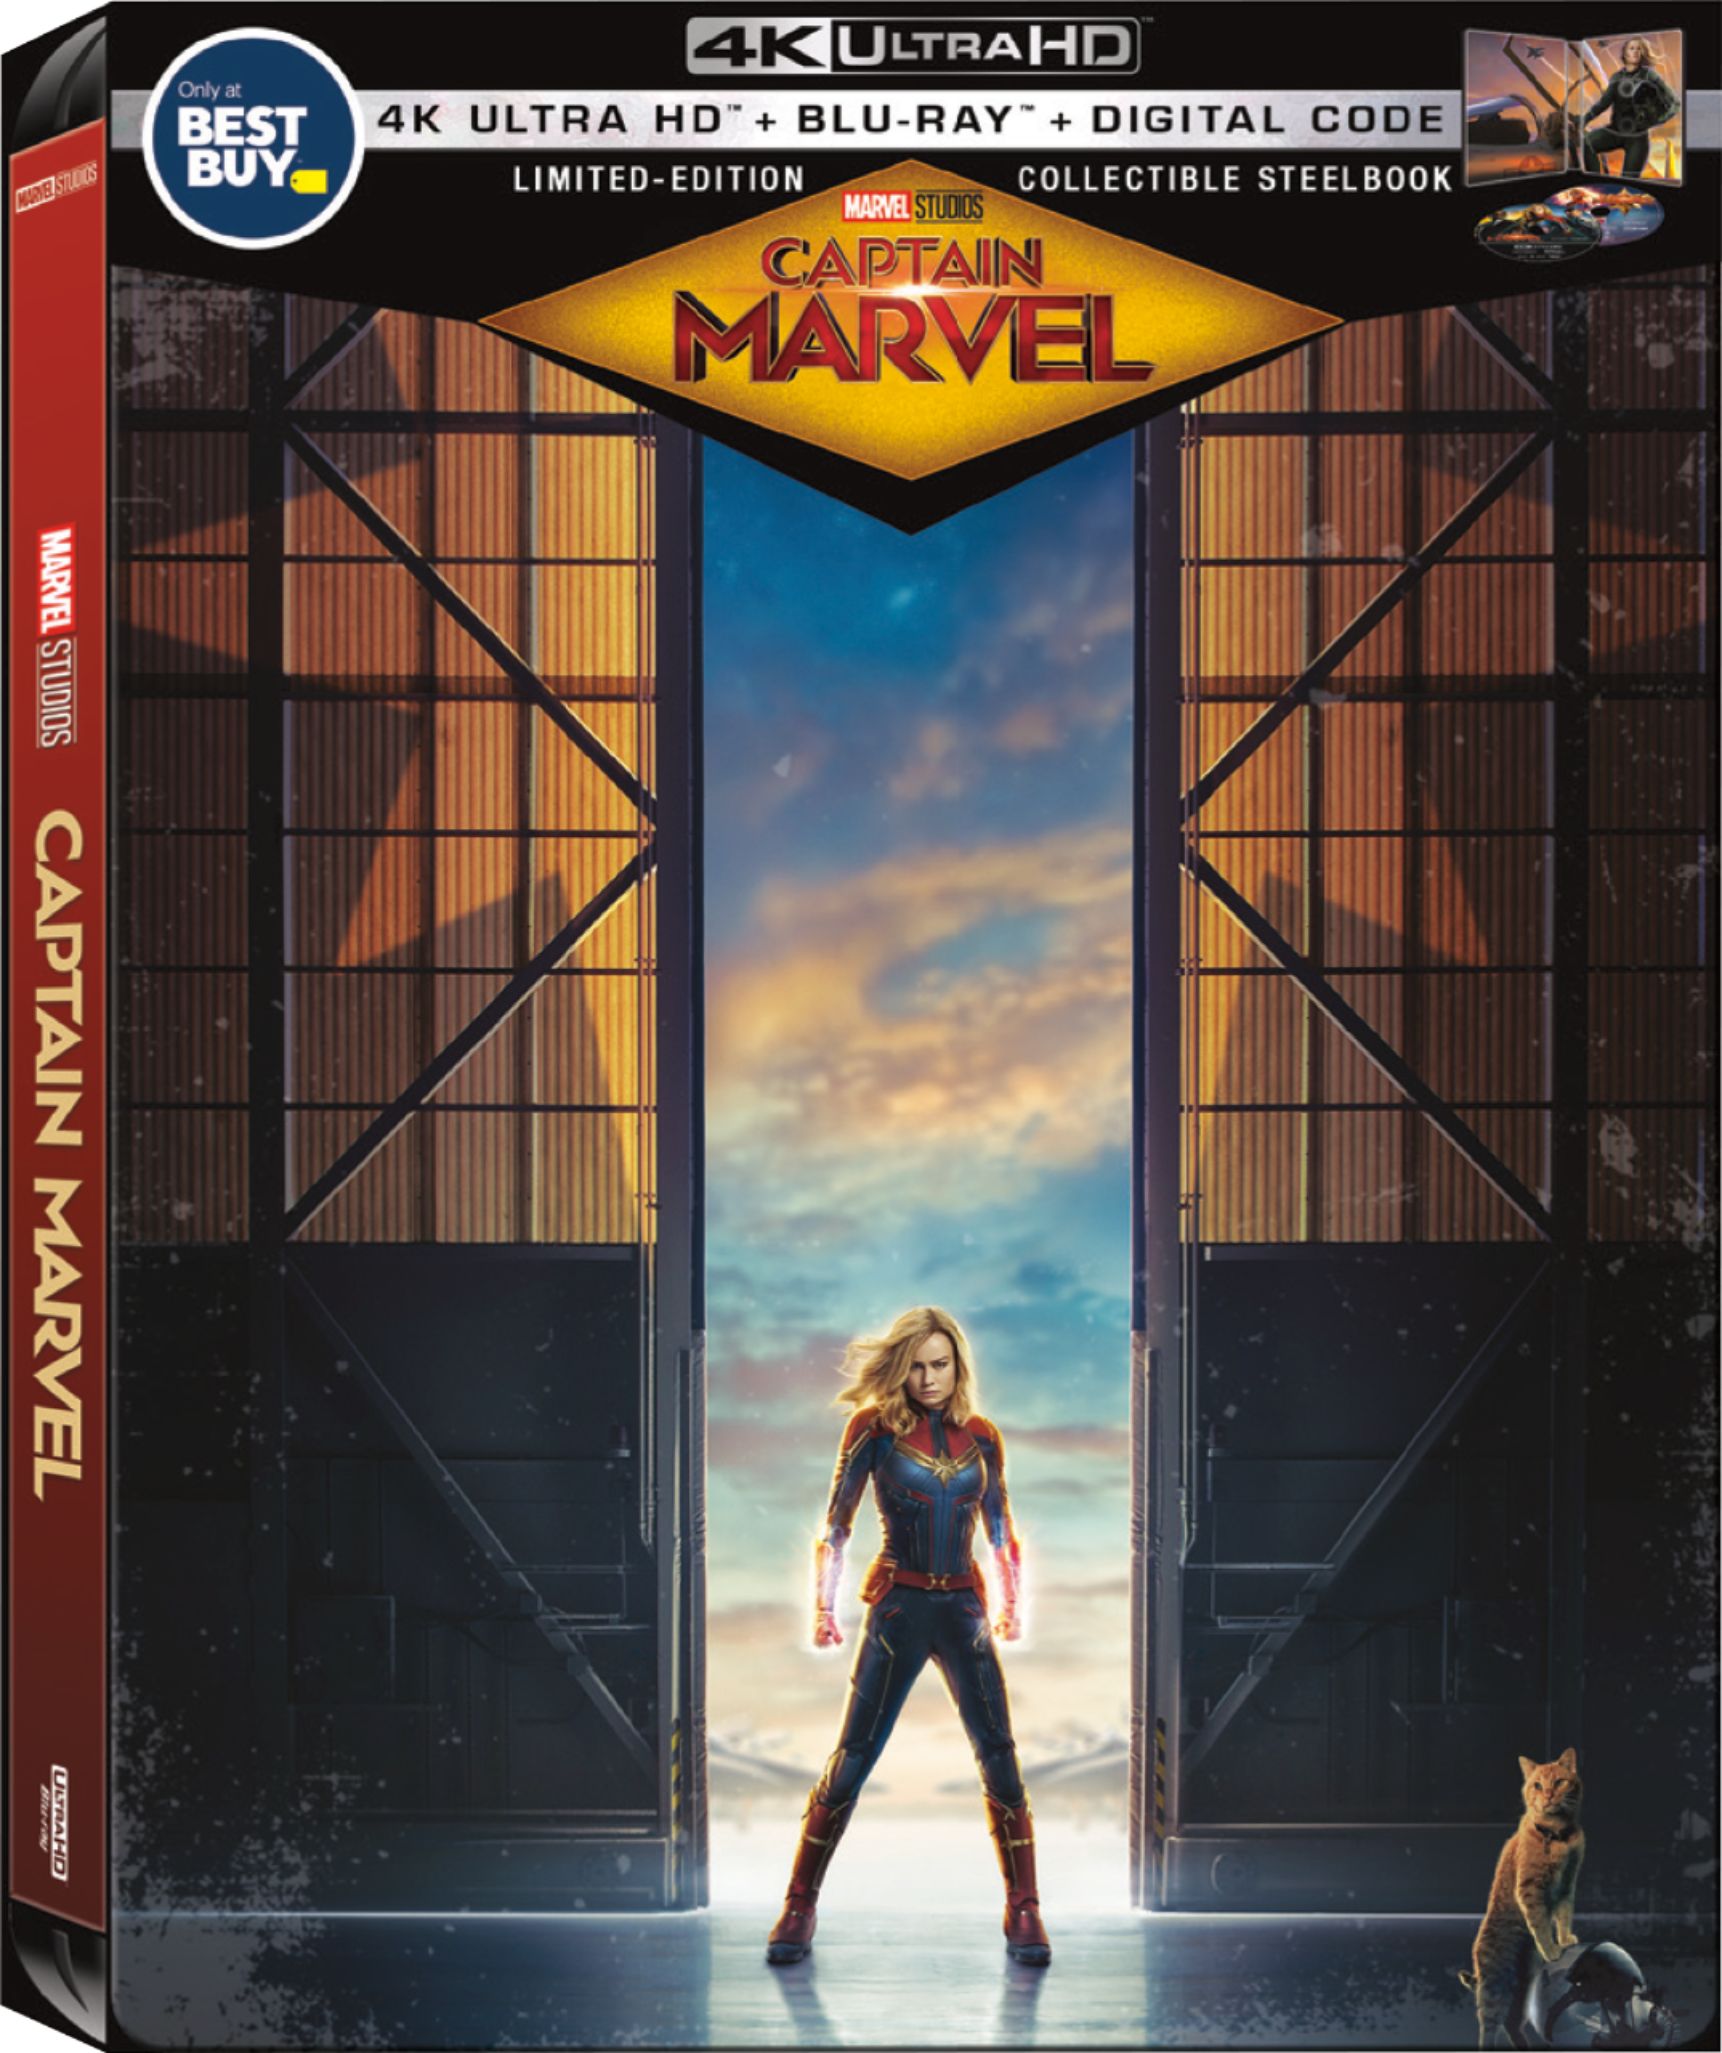 Captain Marvel SteelBook Box Cover from Best Buy